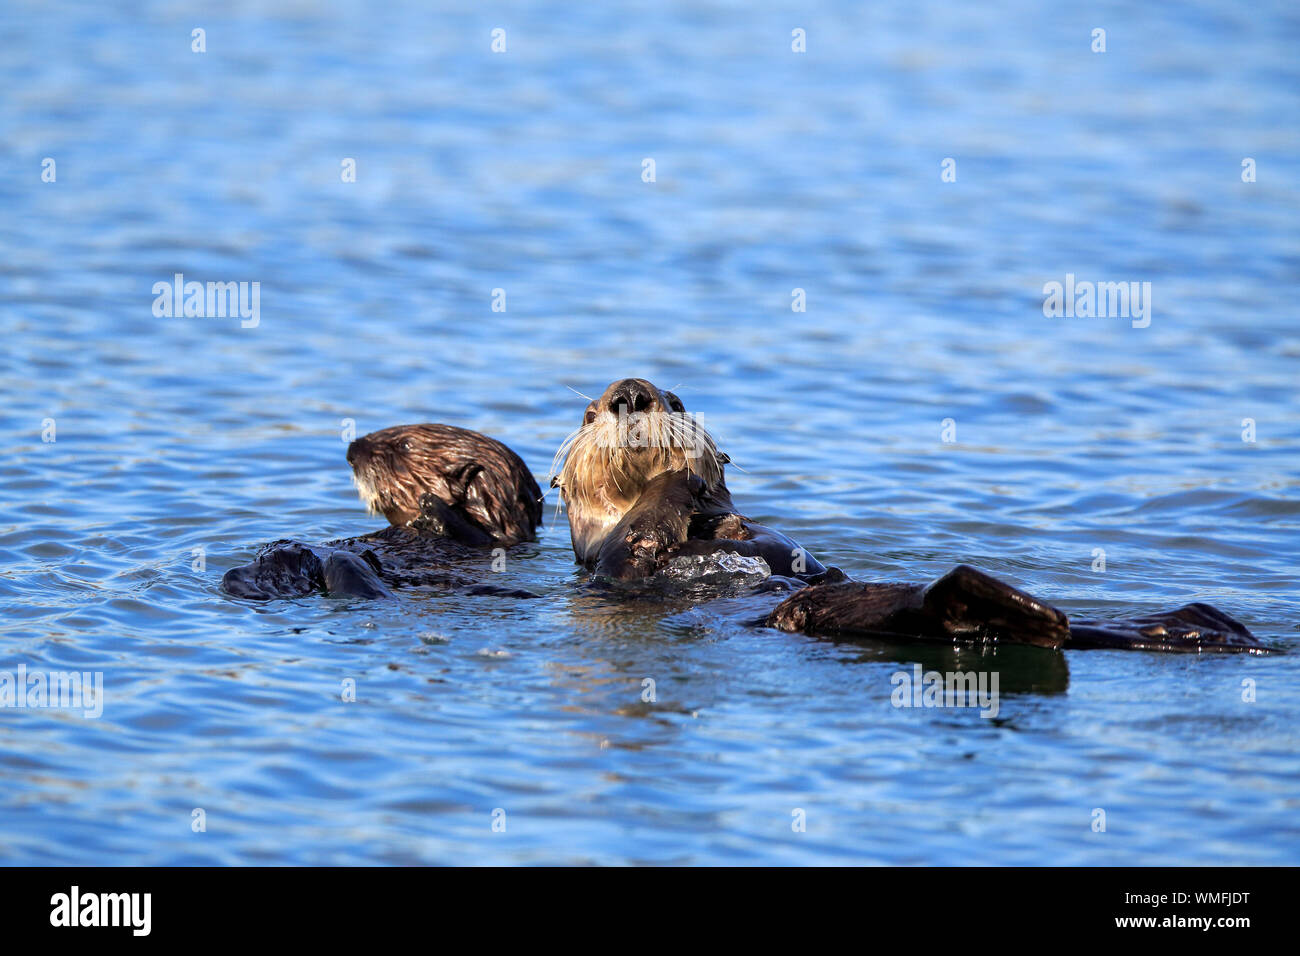 Sea Otter, adult with young, Elkhorn Slough, Monterey, California, North America, USA, (Enhydra lutris) Stock Photo